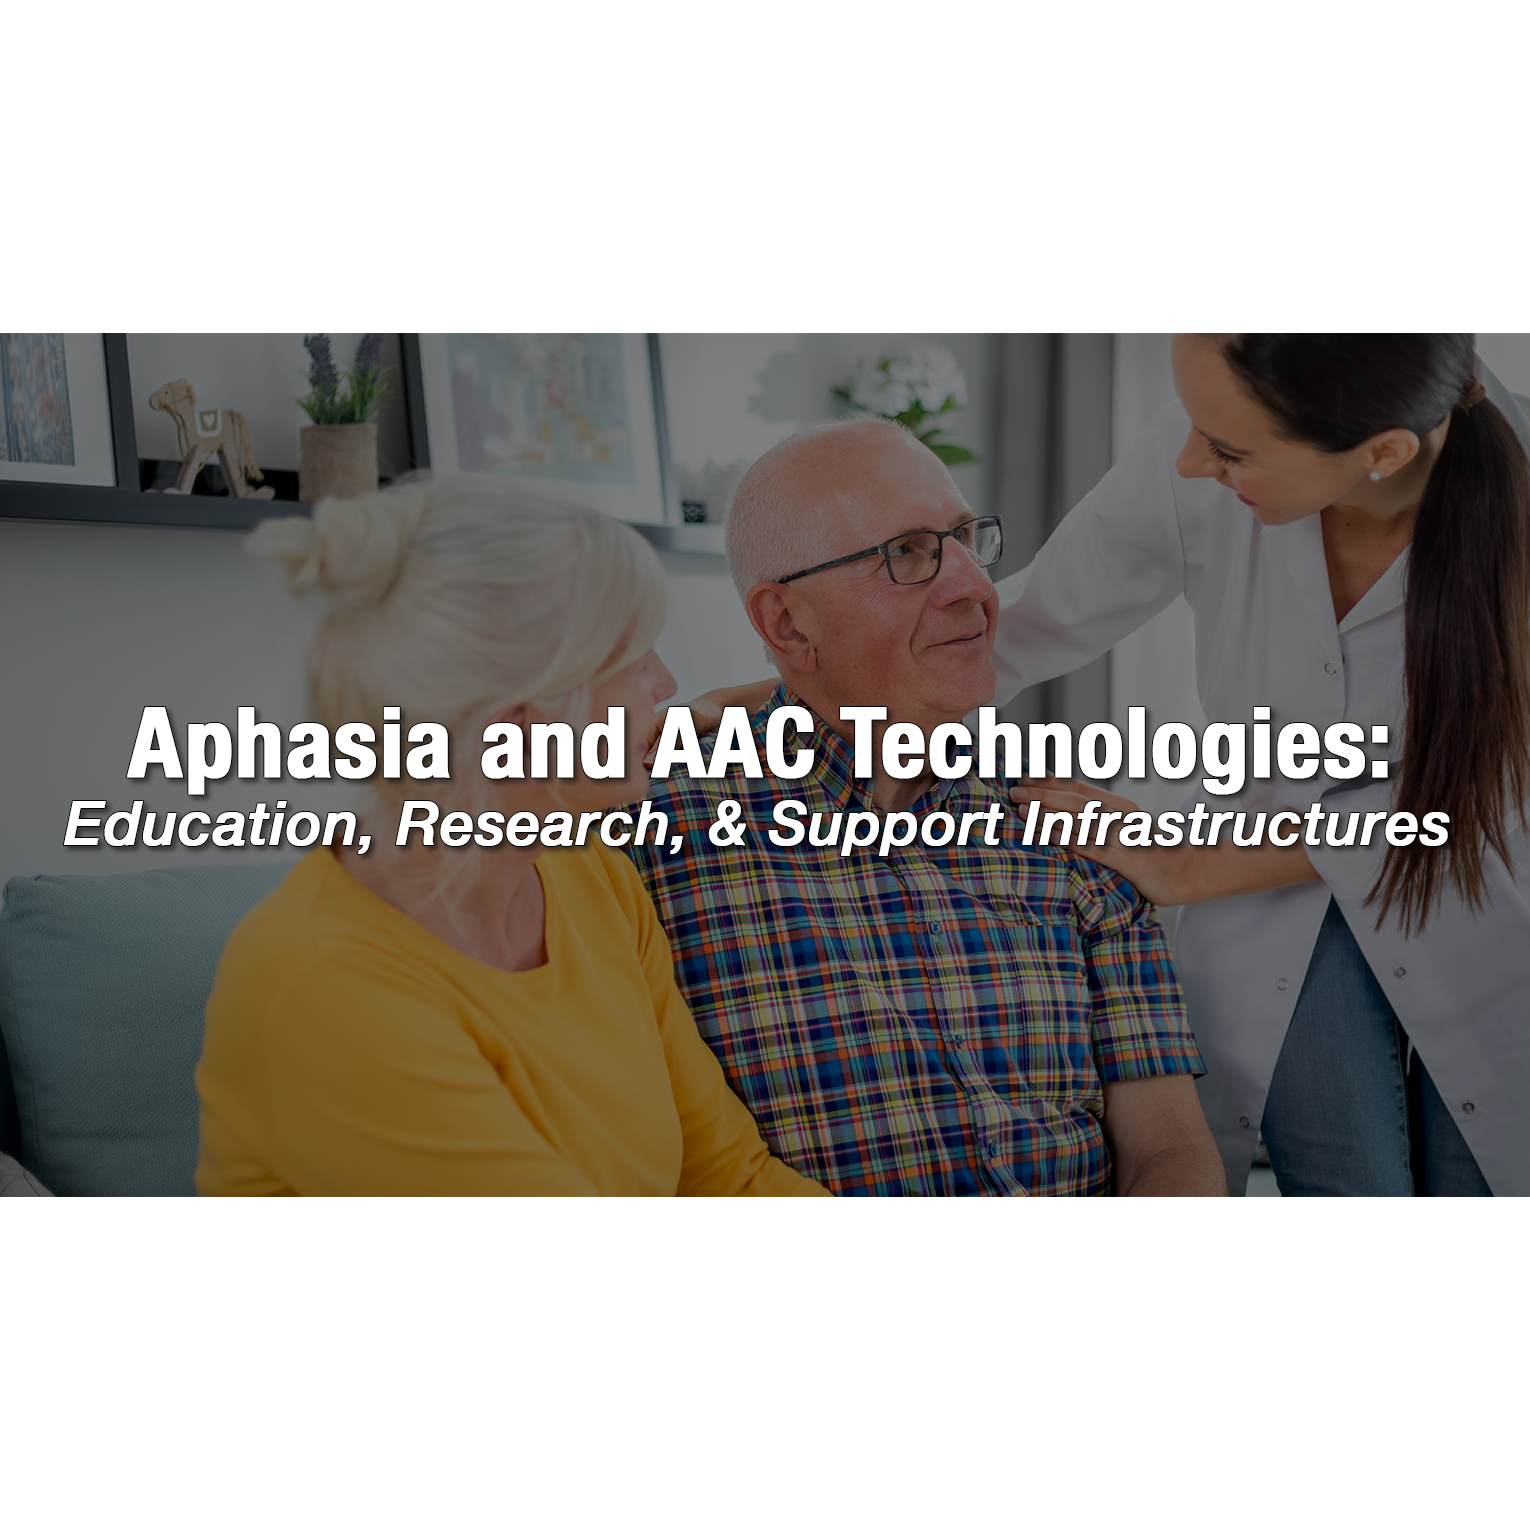 Aphasia and AAC Technologies: Education, Research, & Support Infrastructures